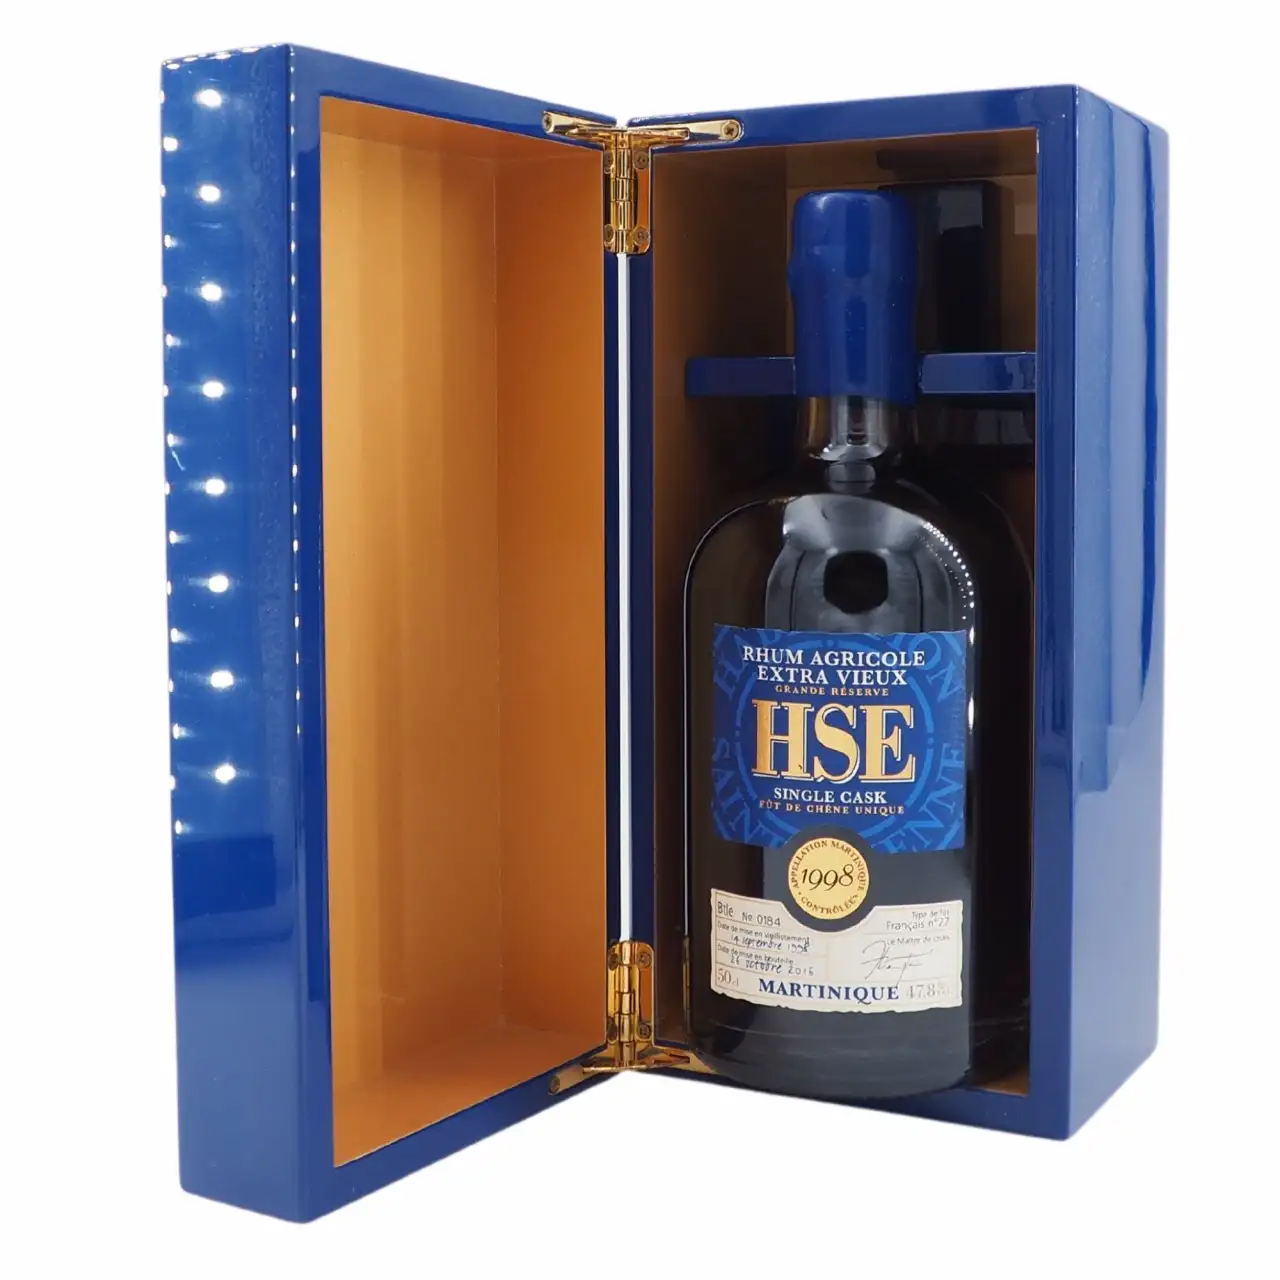 Image of the front of the bottle of the rum HSE Single Cask